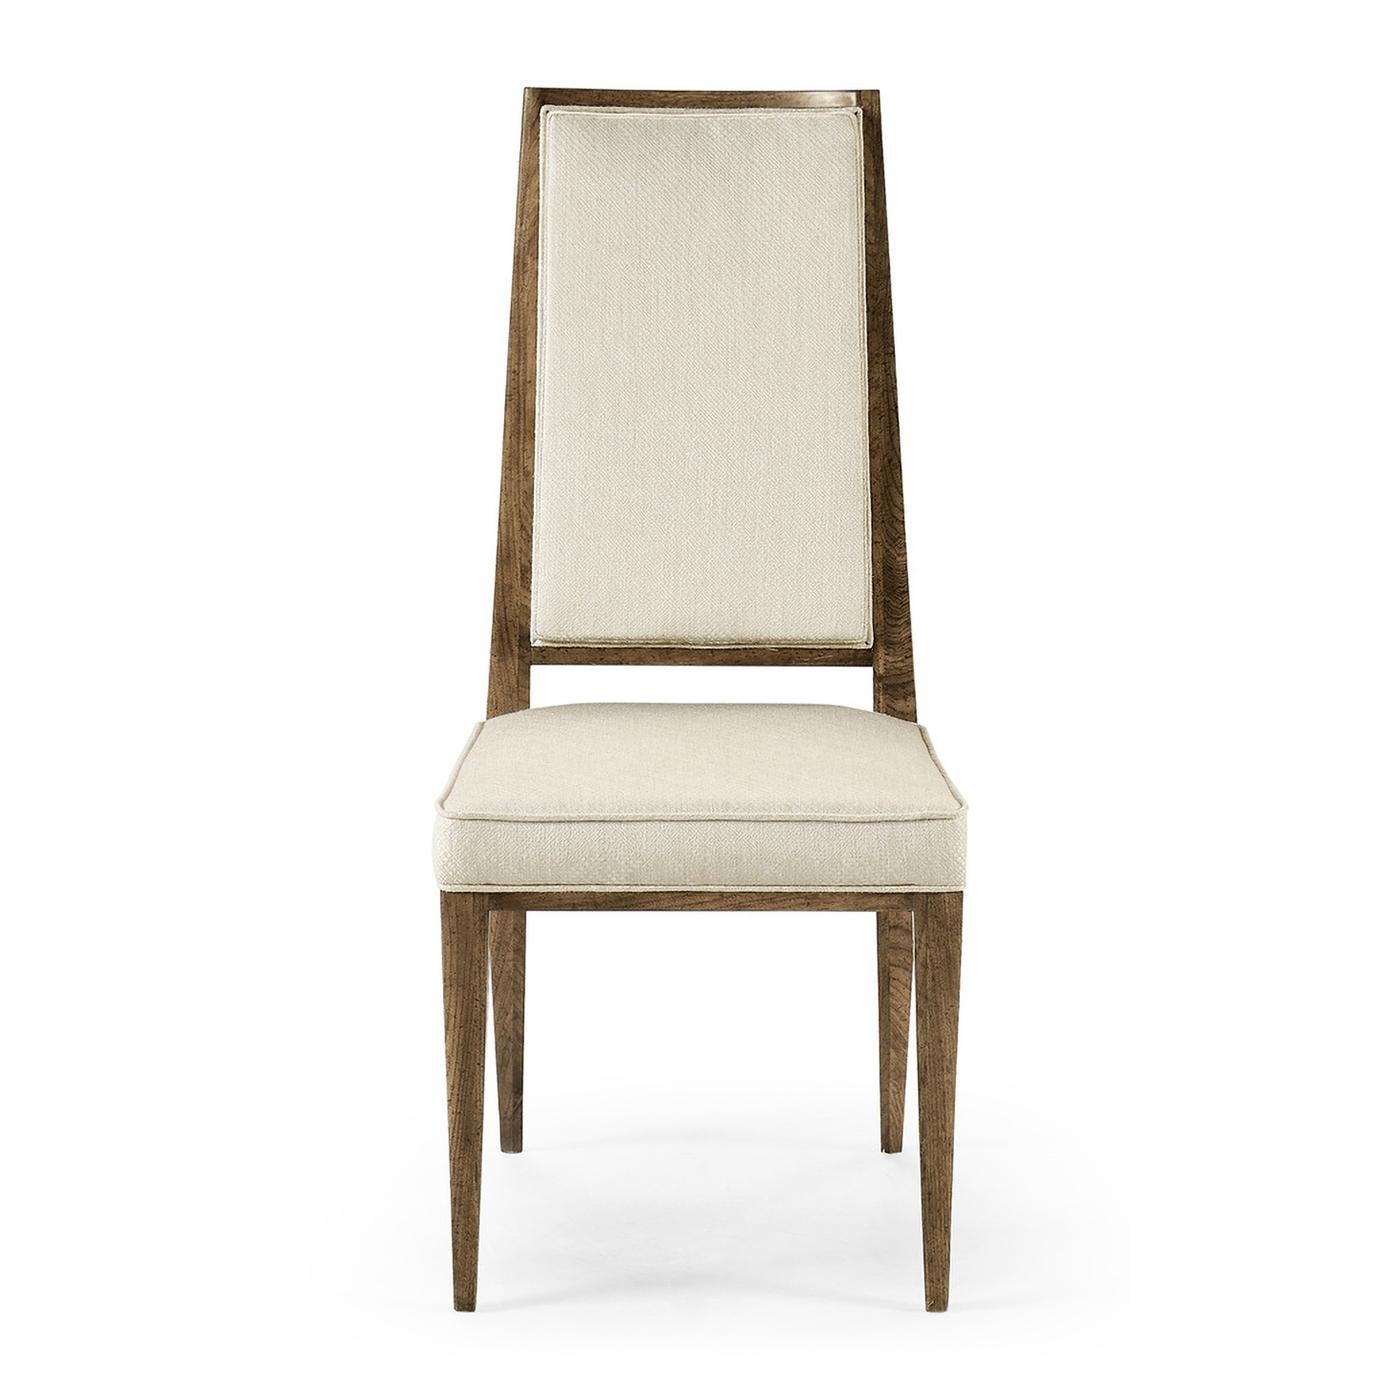 Mid Century Walnut dining chair, sculpted from American walnut, with a transparent, hand-rubbed finish. This chair has elegant simple lines and is upholstered in a performance fabric. 

Dimensions: 19